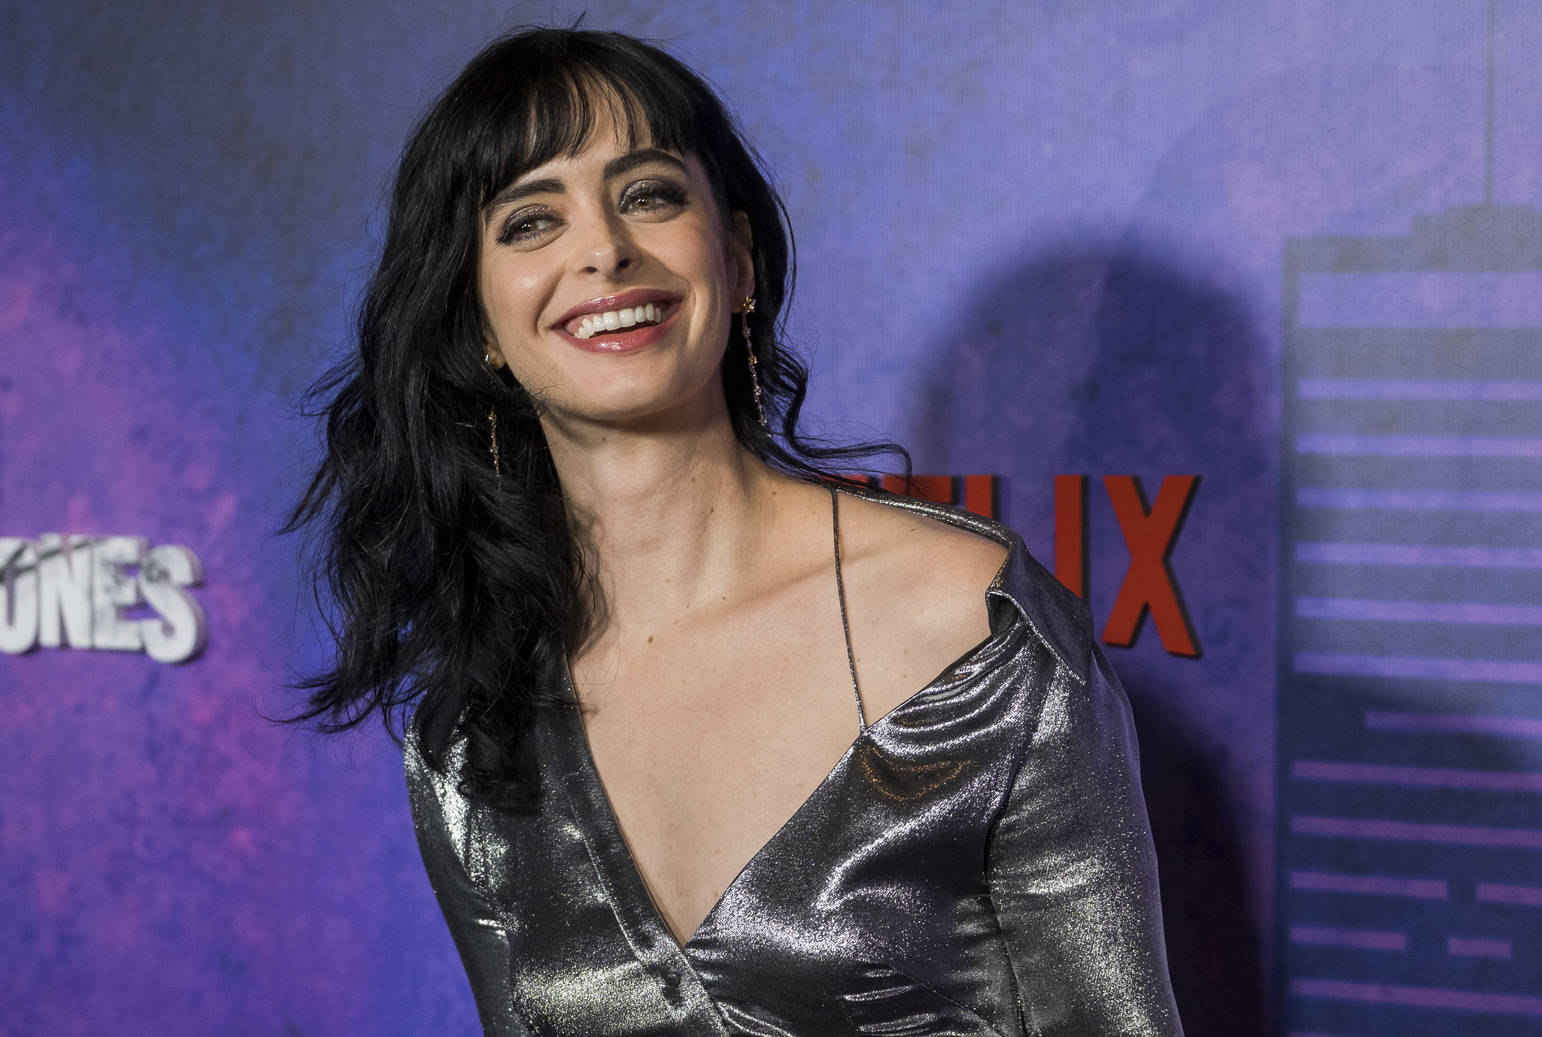 Krysten Ritter attends the Netflix original series premiere of “Marvel’s Jessica Jones” season 2 at AMC Loews Lincoln Square on March 7 in New York. (Photo by Charles Sykes/Invision/AP)